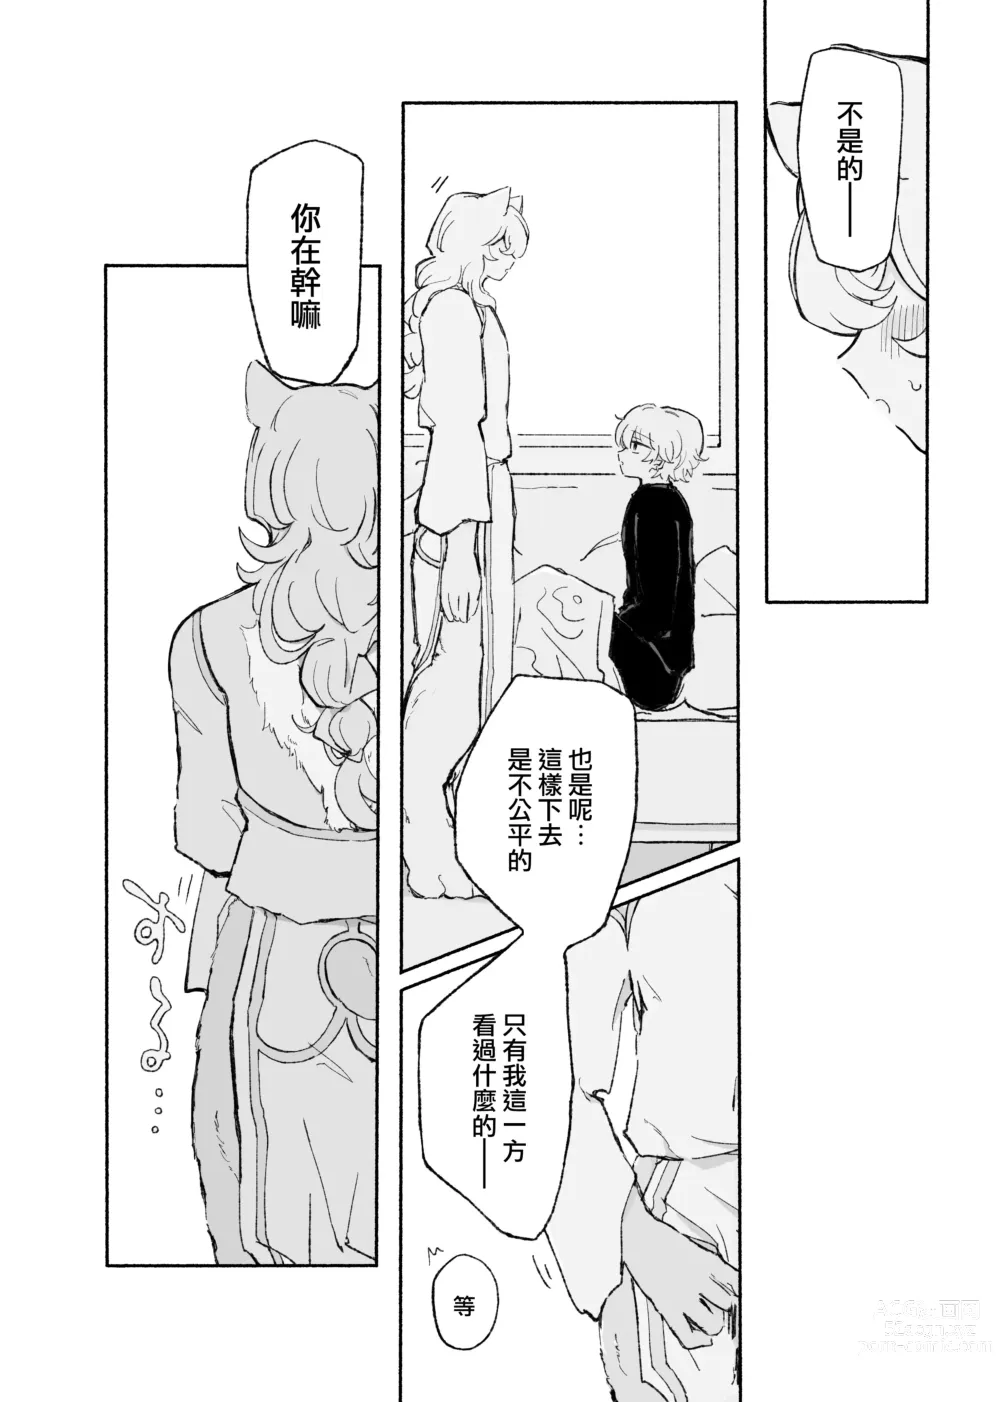 Page 16 of doujinshi 零之惡魔